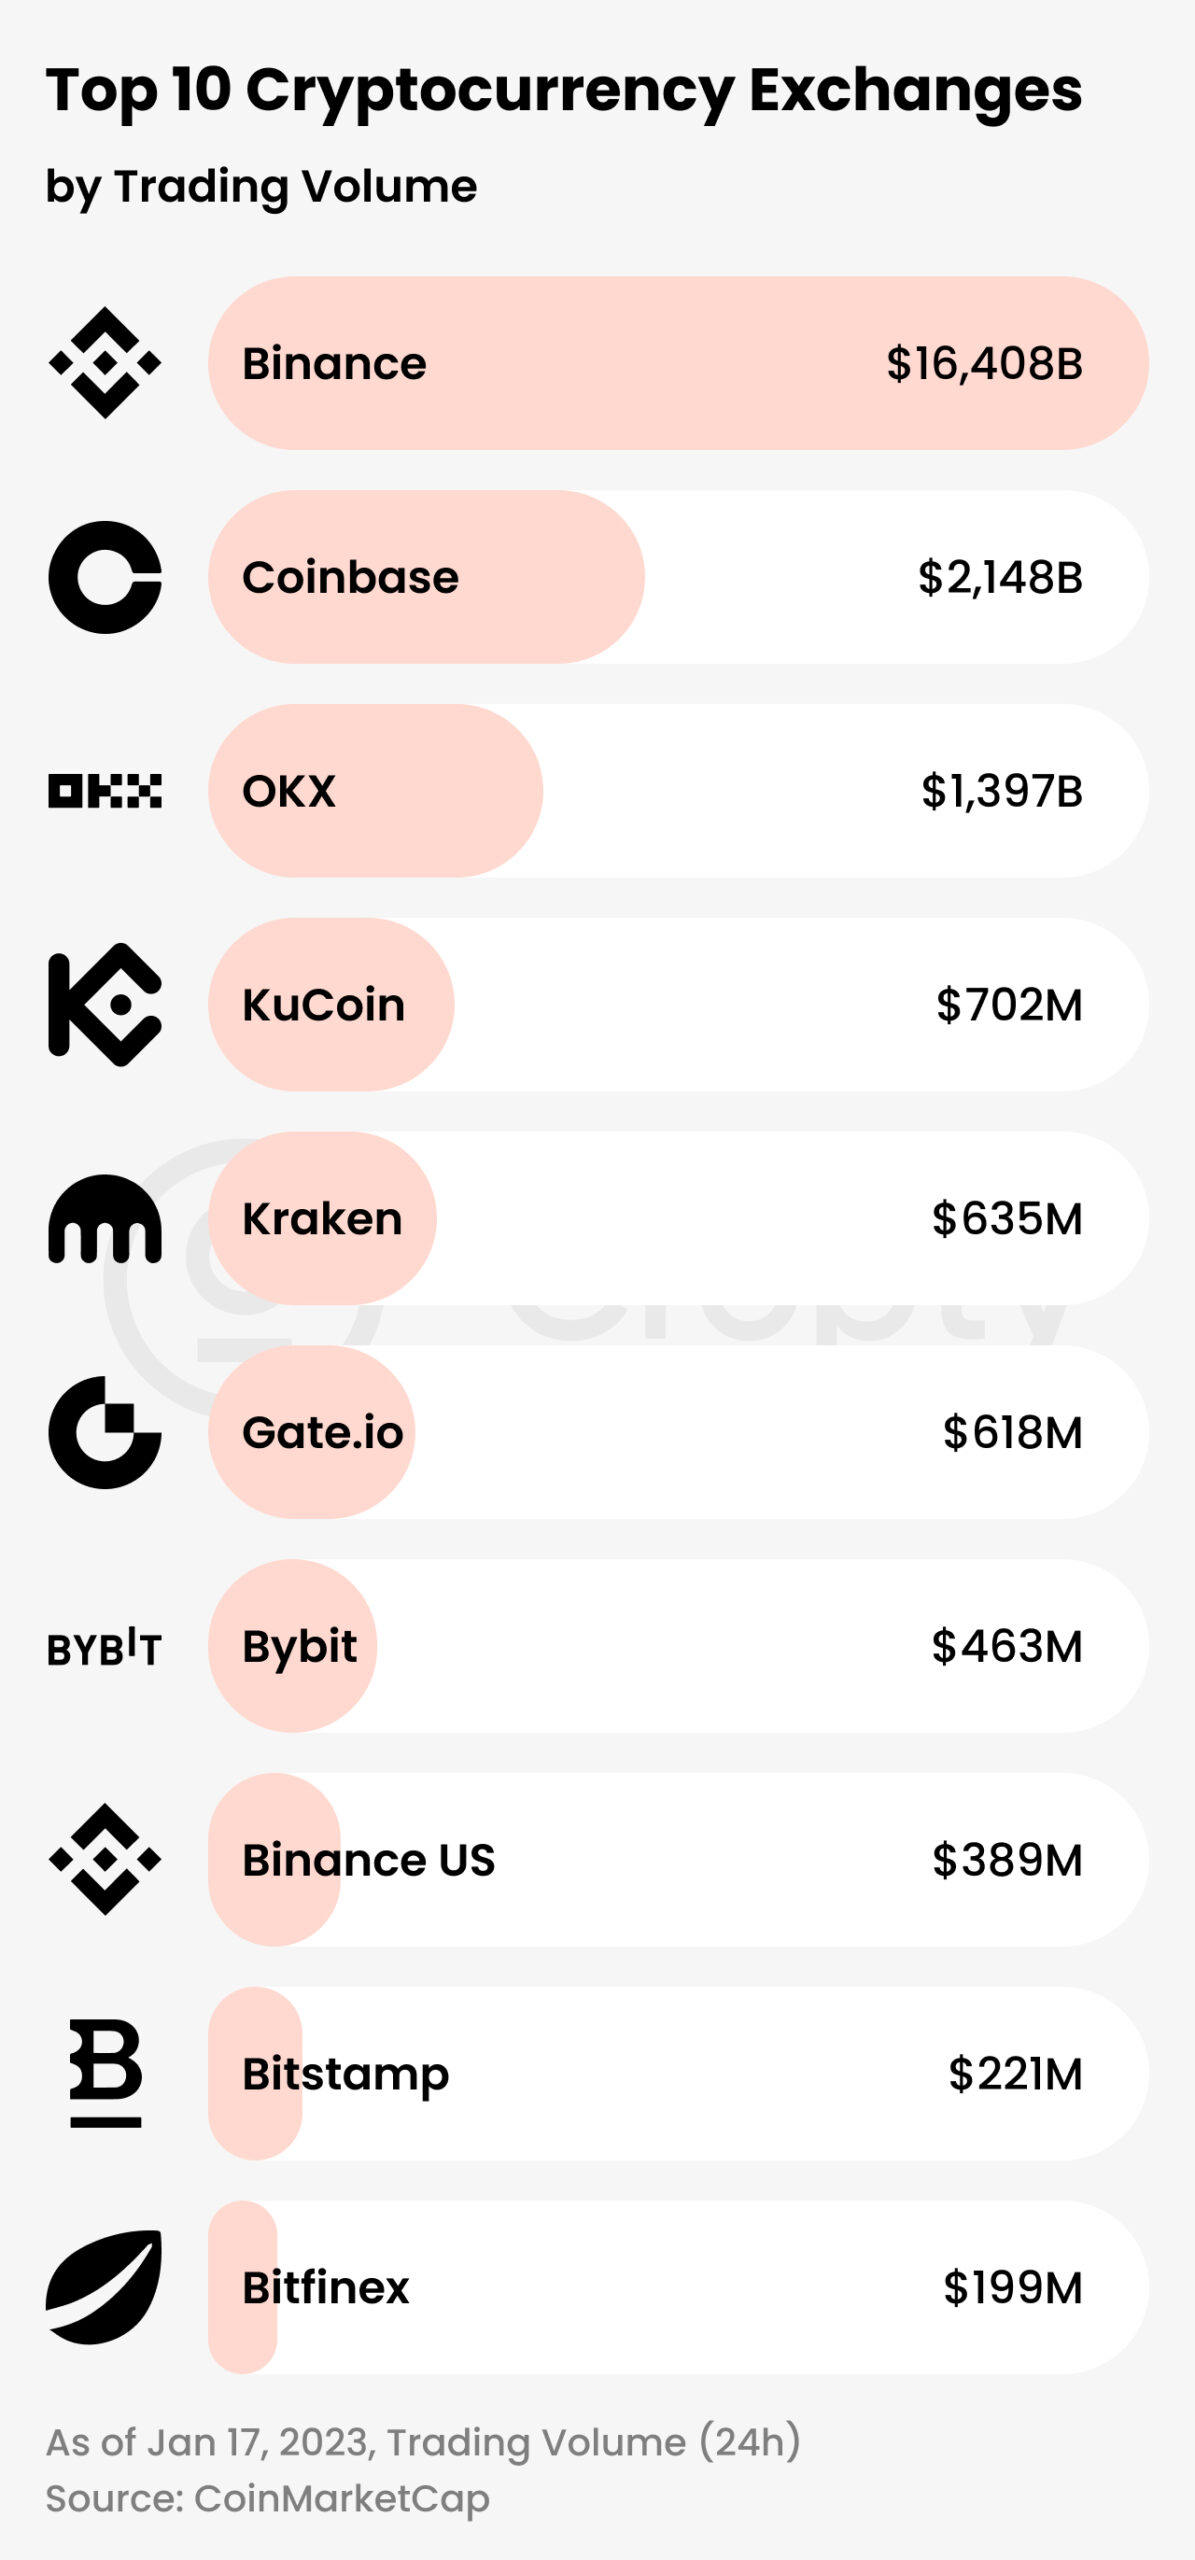 a chart of top cryptocurrency exchanges by trading volume, an icon of binance, an icon of coinbase, an icon of okx, an icon of kucoin, an icon of kraken, an icon of gate.io, an icon of bybit, an icon of binance us, an icon of bitstamp, an icon of bitfinex